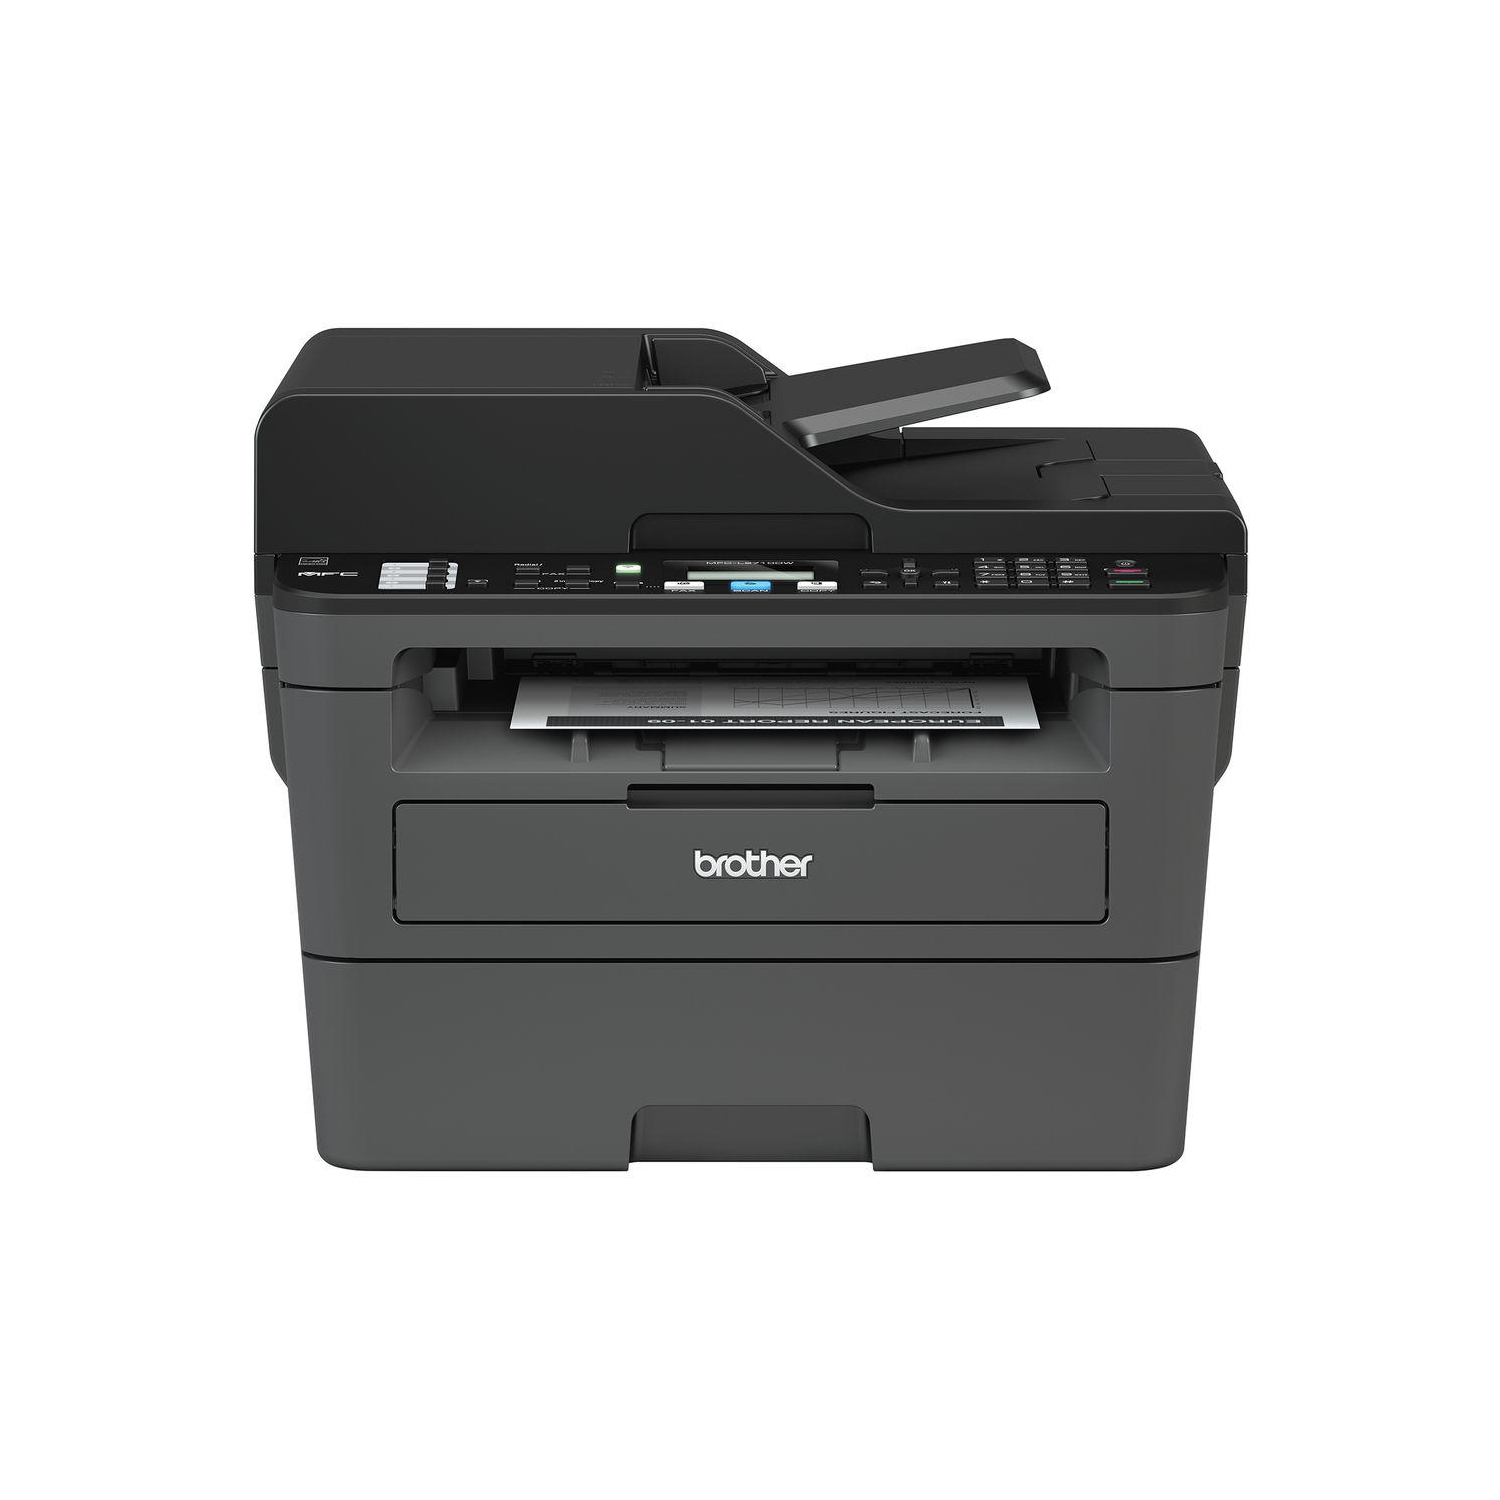 For Brother MFC-L2710DW All-in-One Monochrome Black and White Laser Printer with Fax, Printing Copying and Scanning